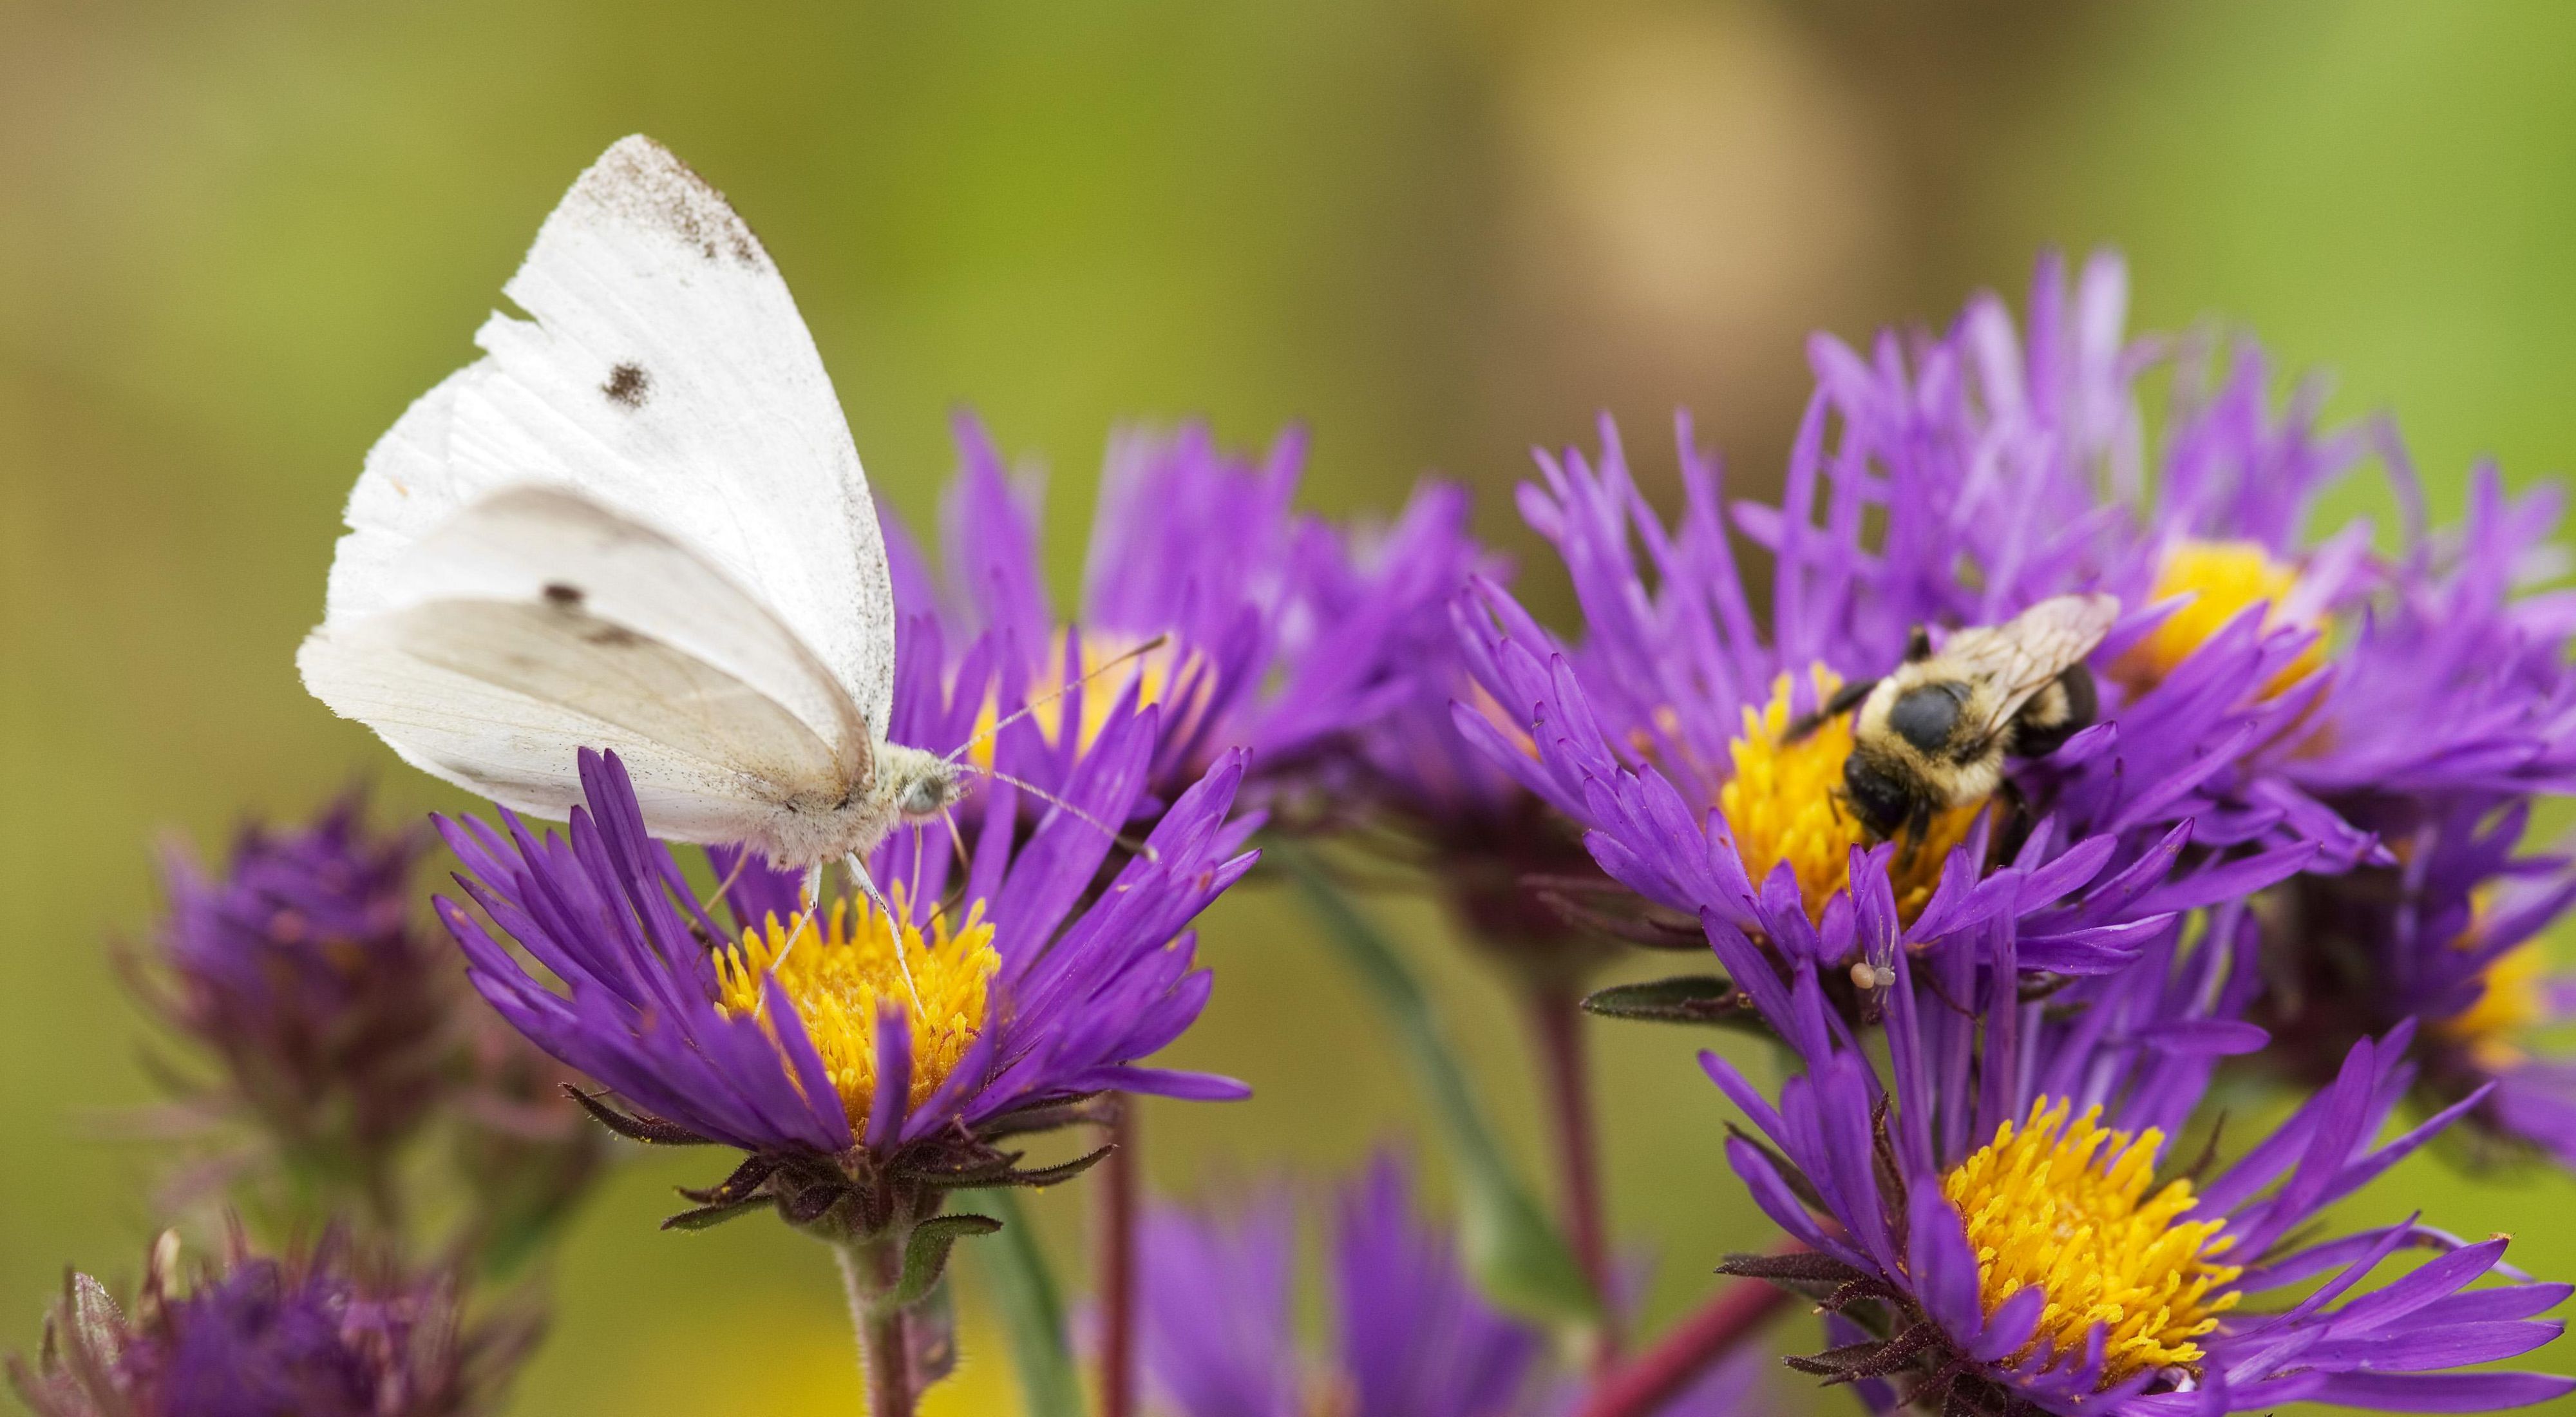 A white butterfly and a bumblebee on purple flowers.